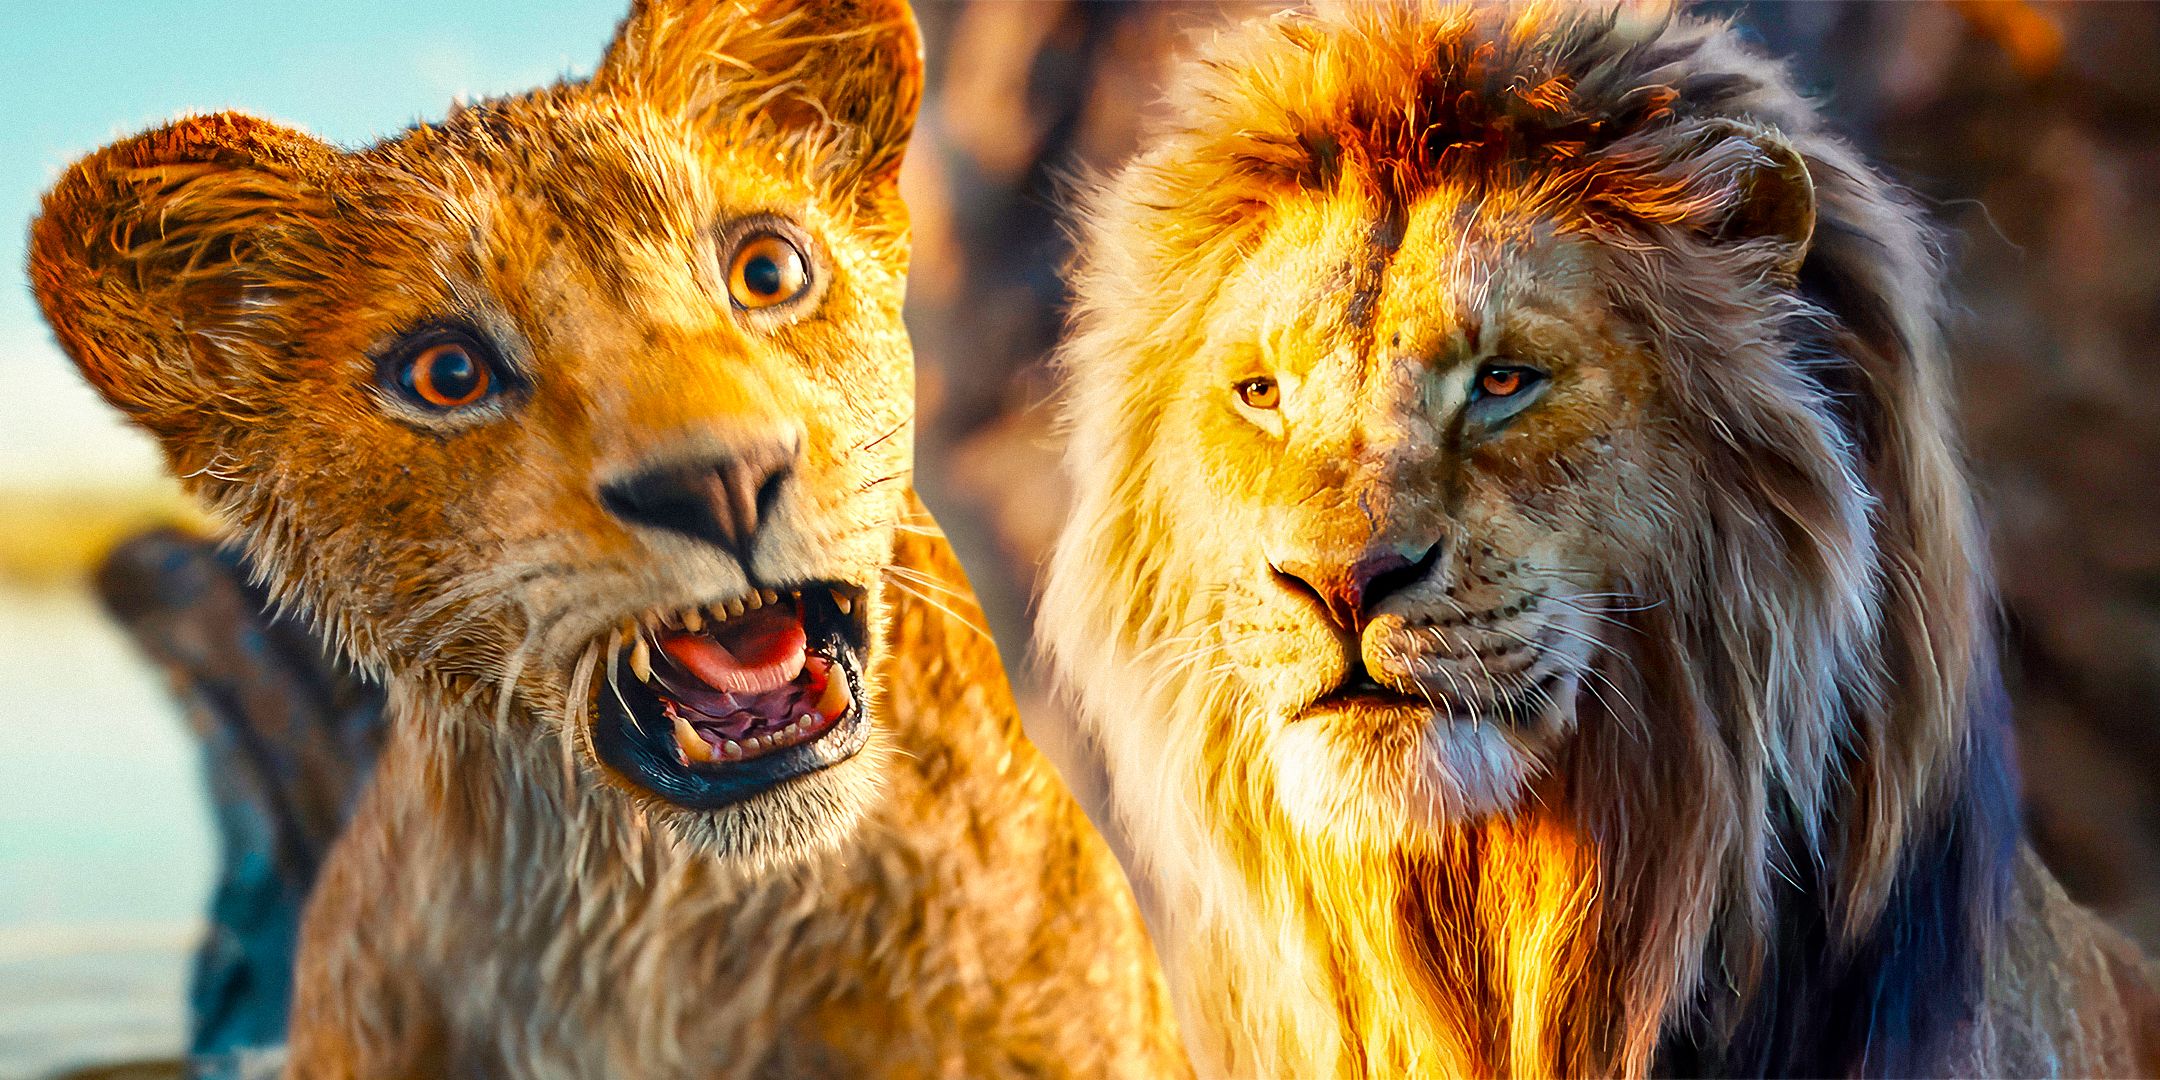 Images of a young Mufasa and older version of the character from Mufasa: The Lion King